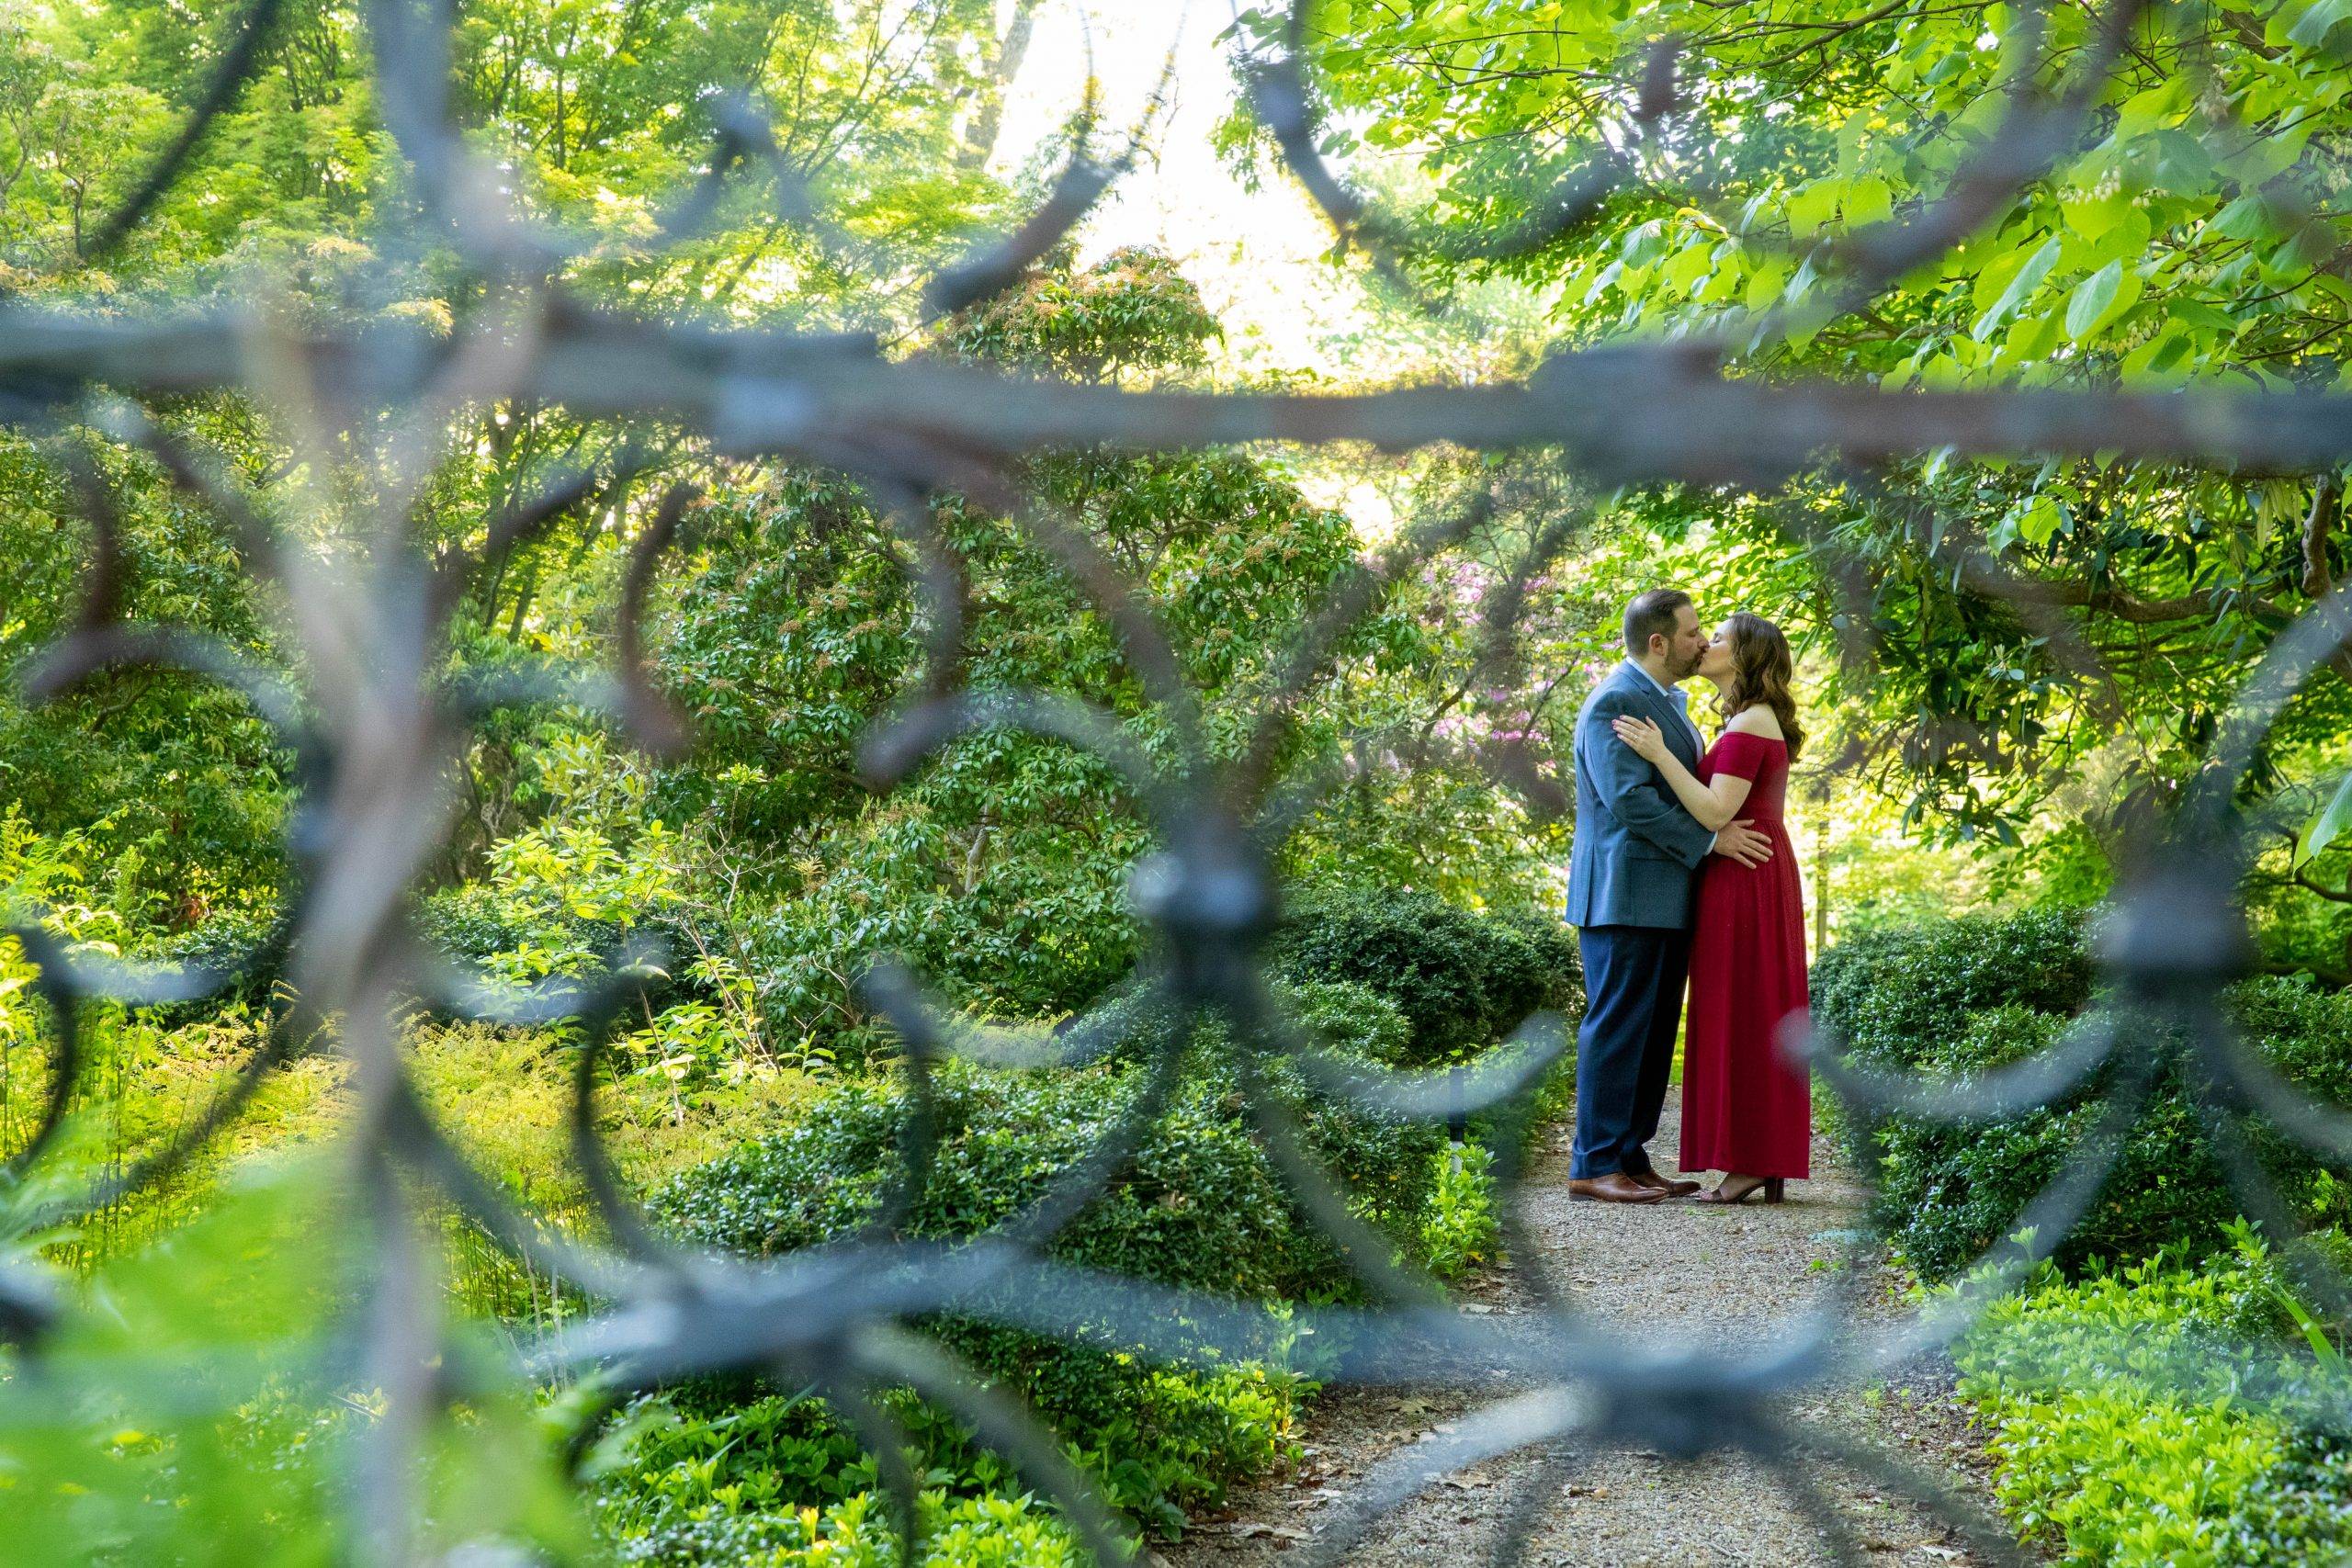 A couple kisses in front of a fence in a garden.